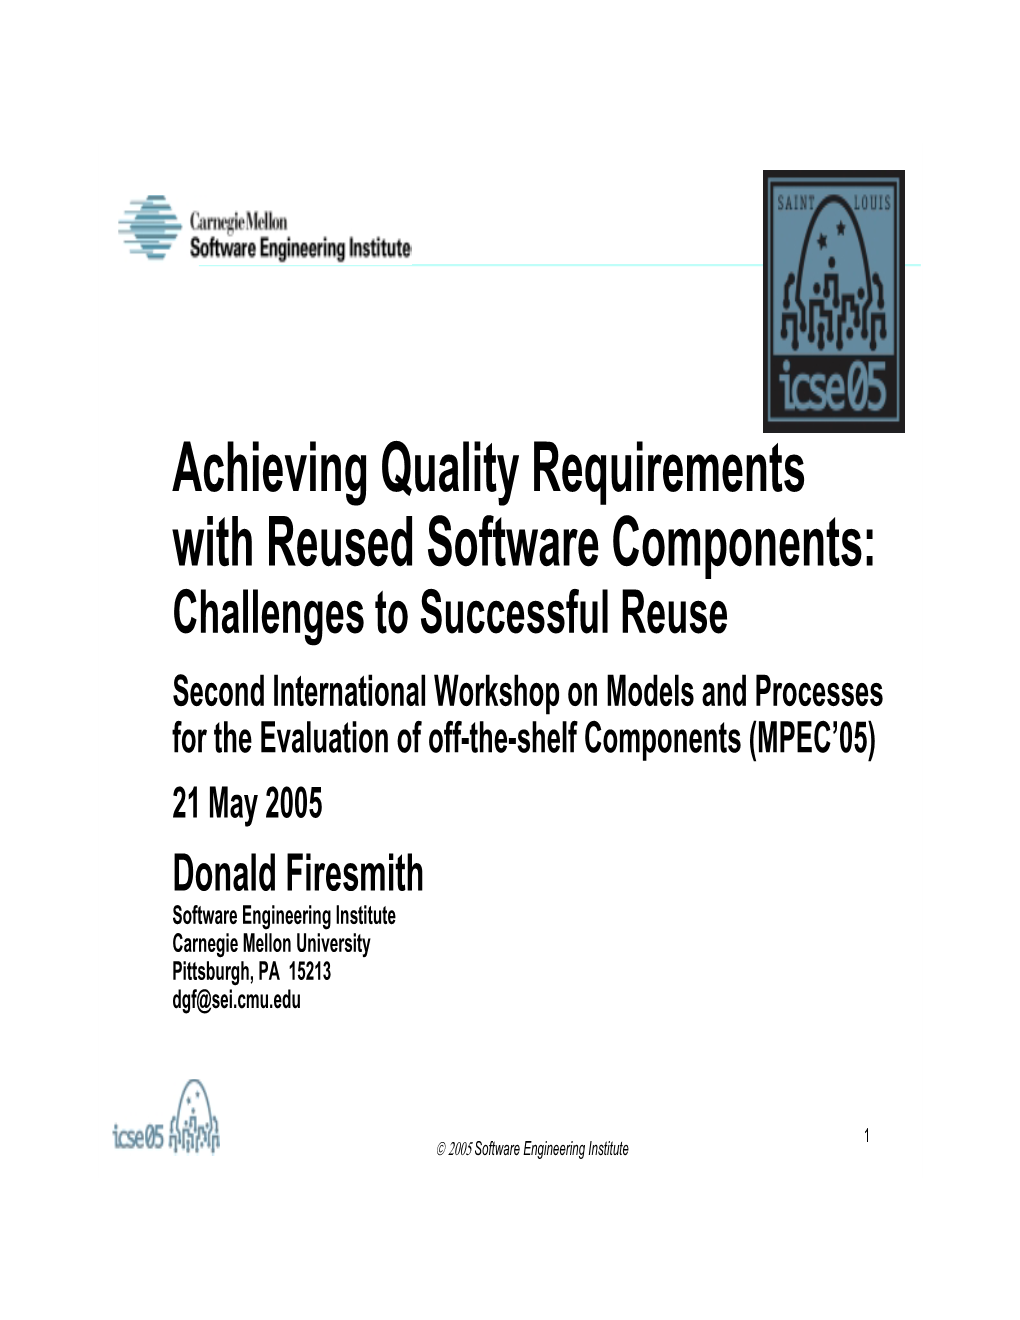 Achieving Quality Requirements with Reused Software Components